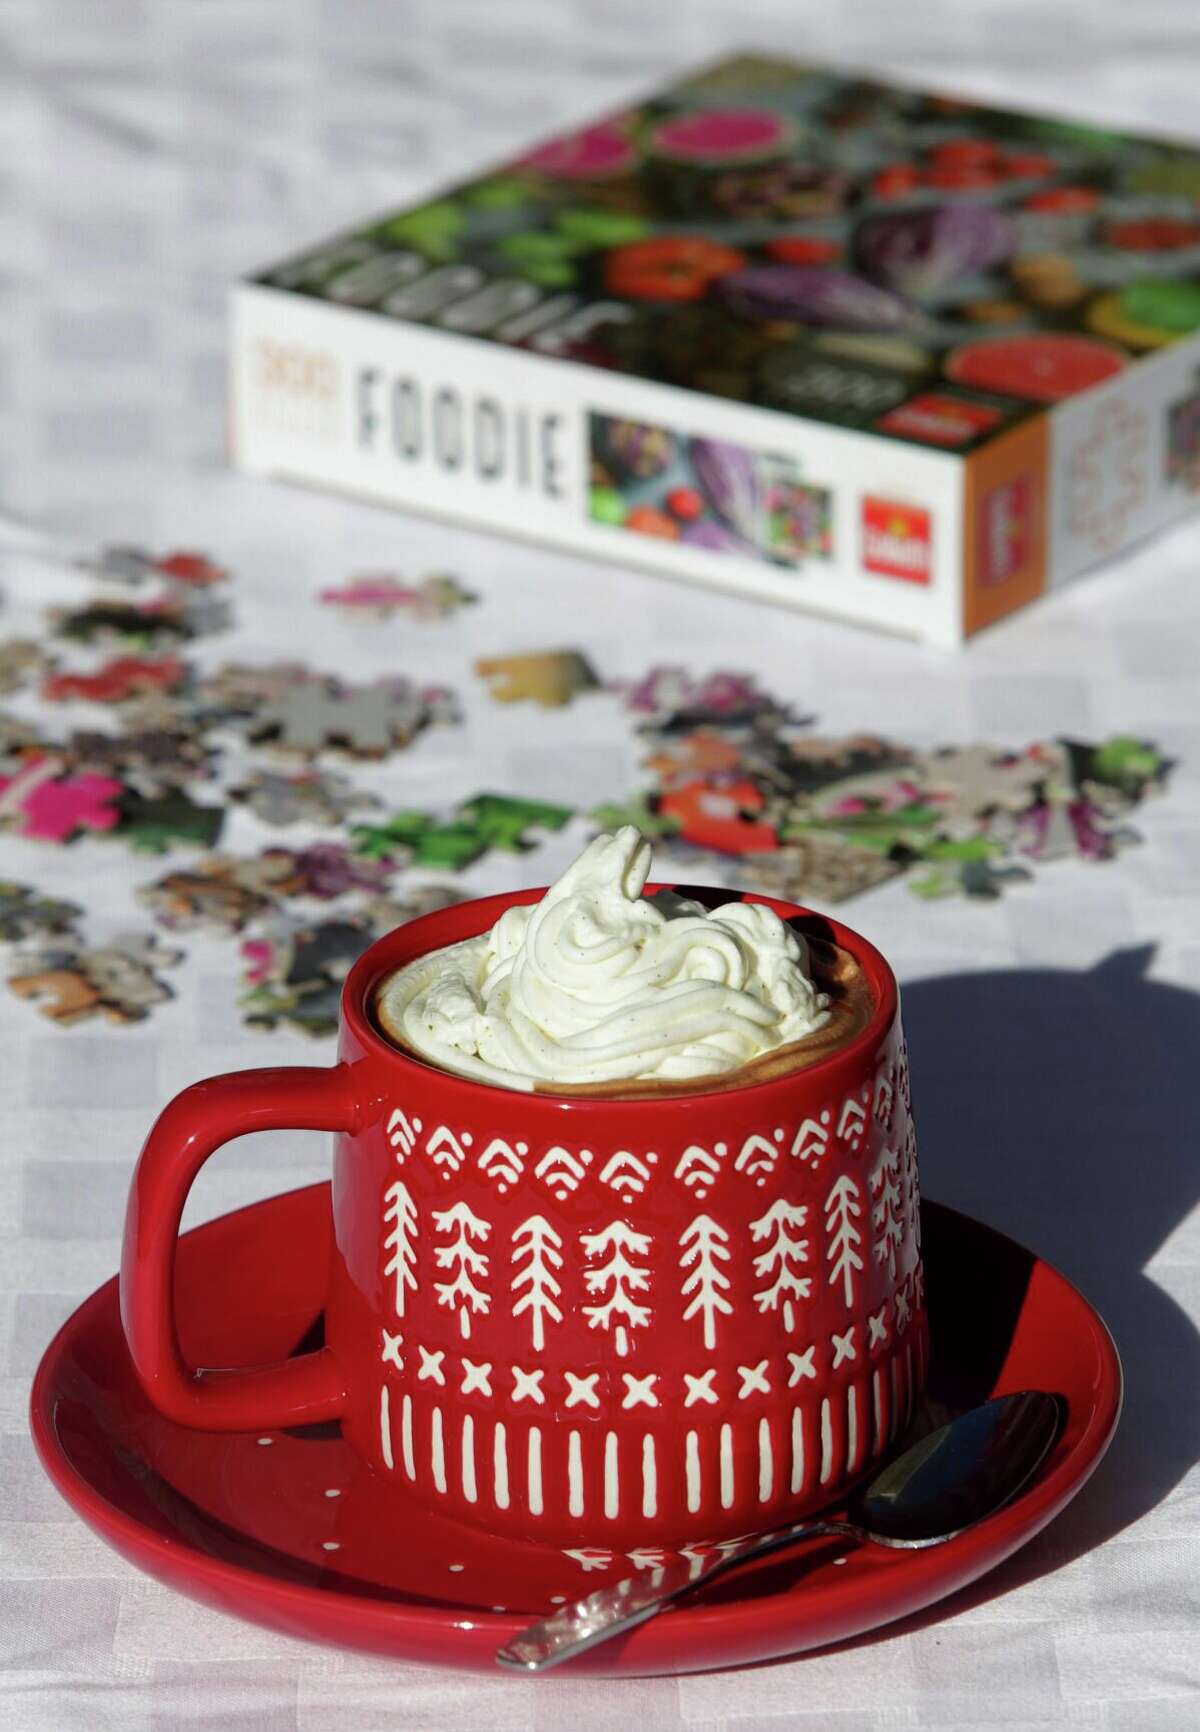 Hot chocolate, like this Parisian Hot Chocolate, topped with Chantilly whipped cream, is an ideal beverage to sip on a cold winter's night while working a jigsaw puzzle.